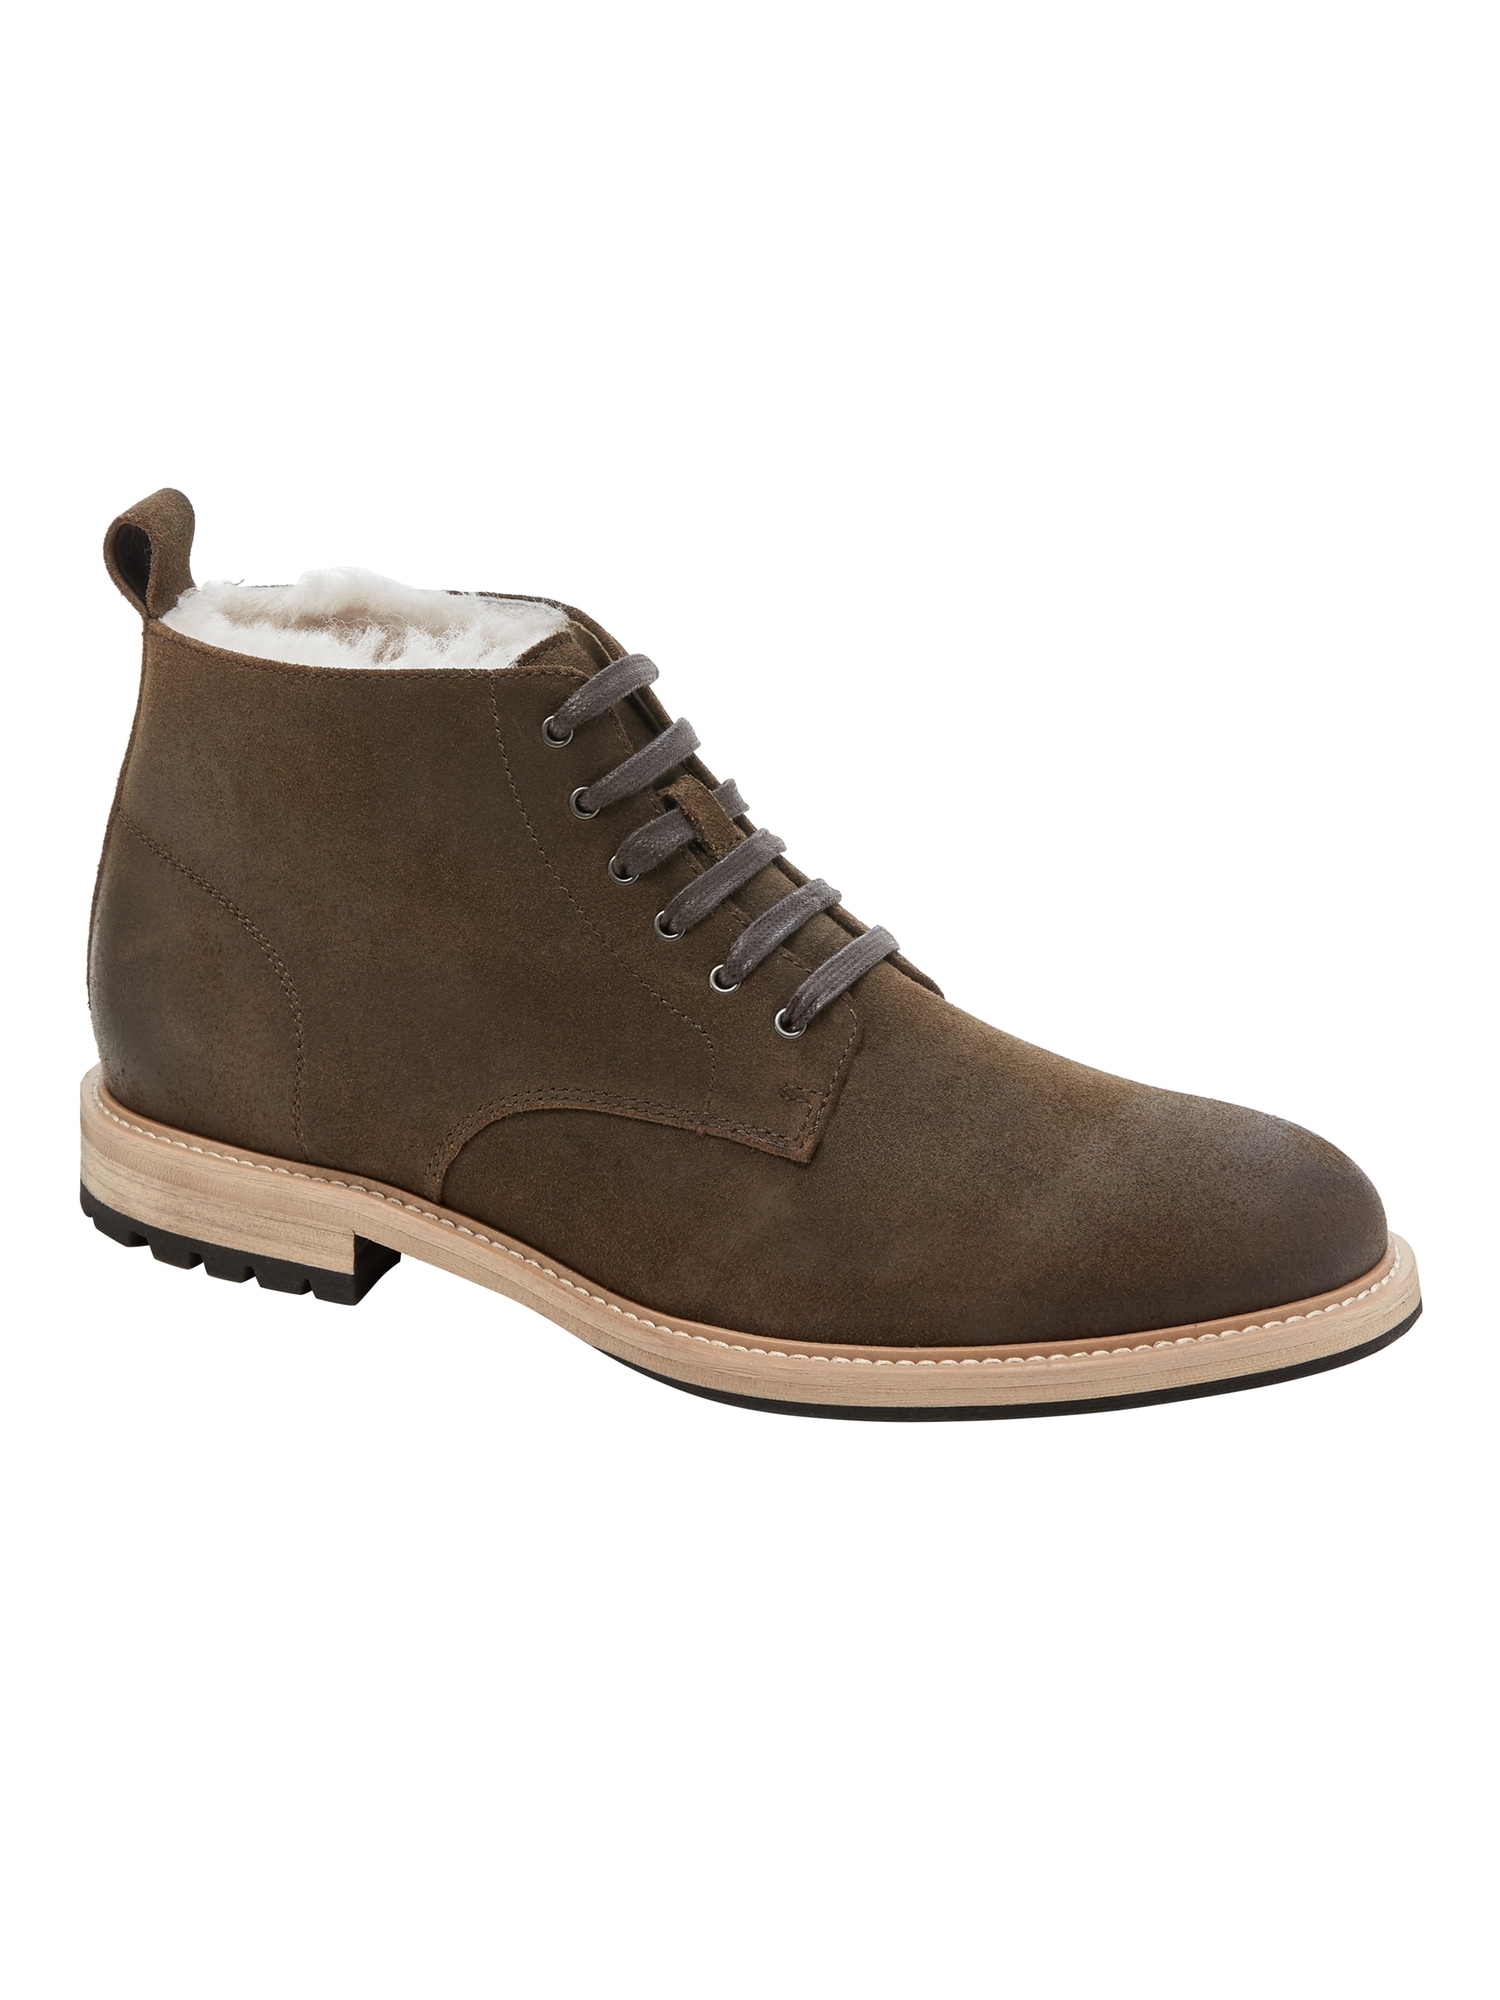 Arley Shearling Suede Boot